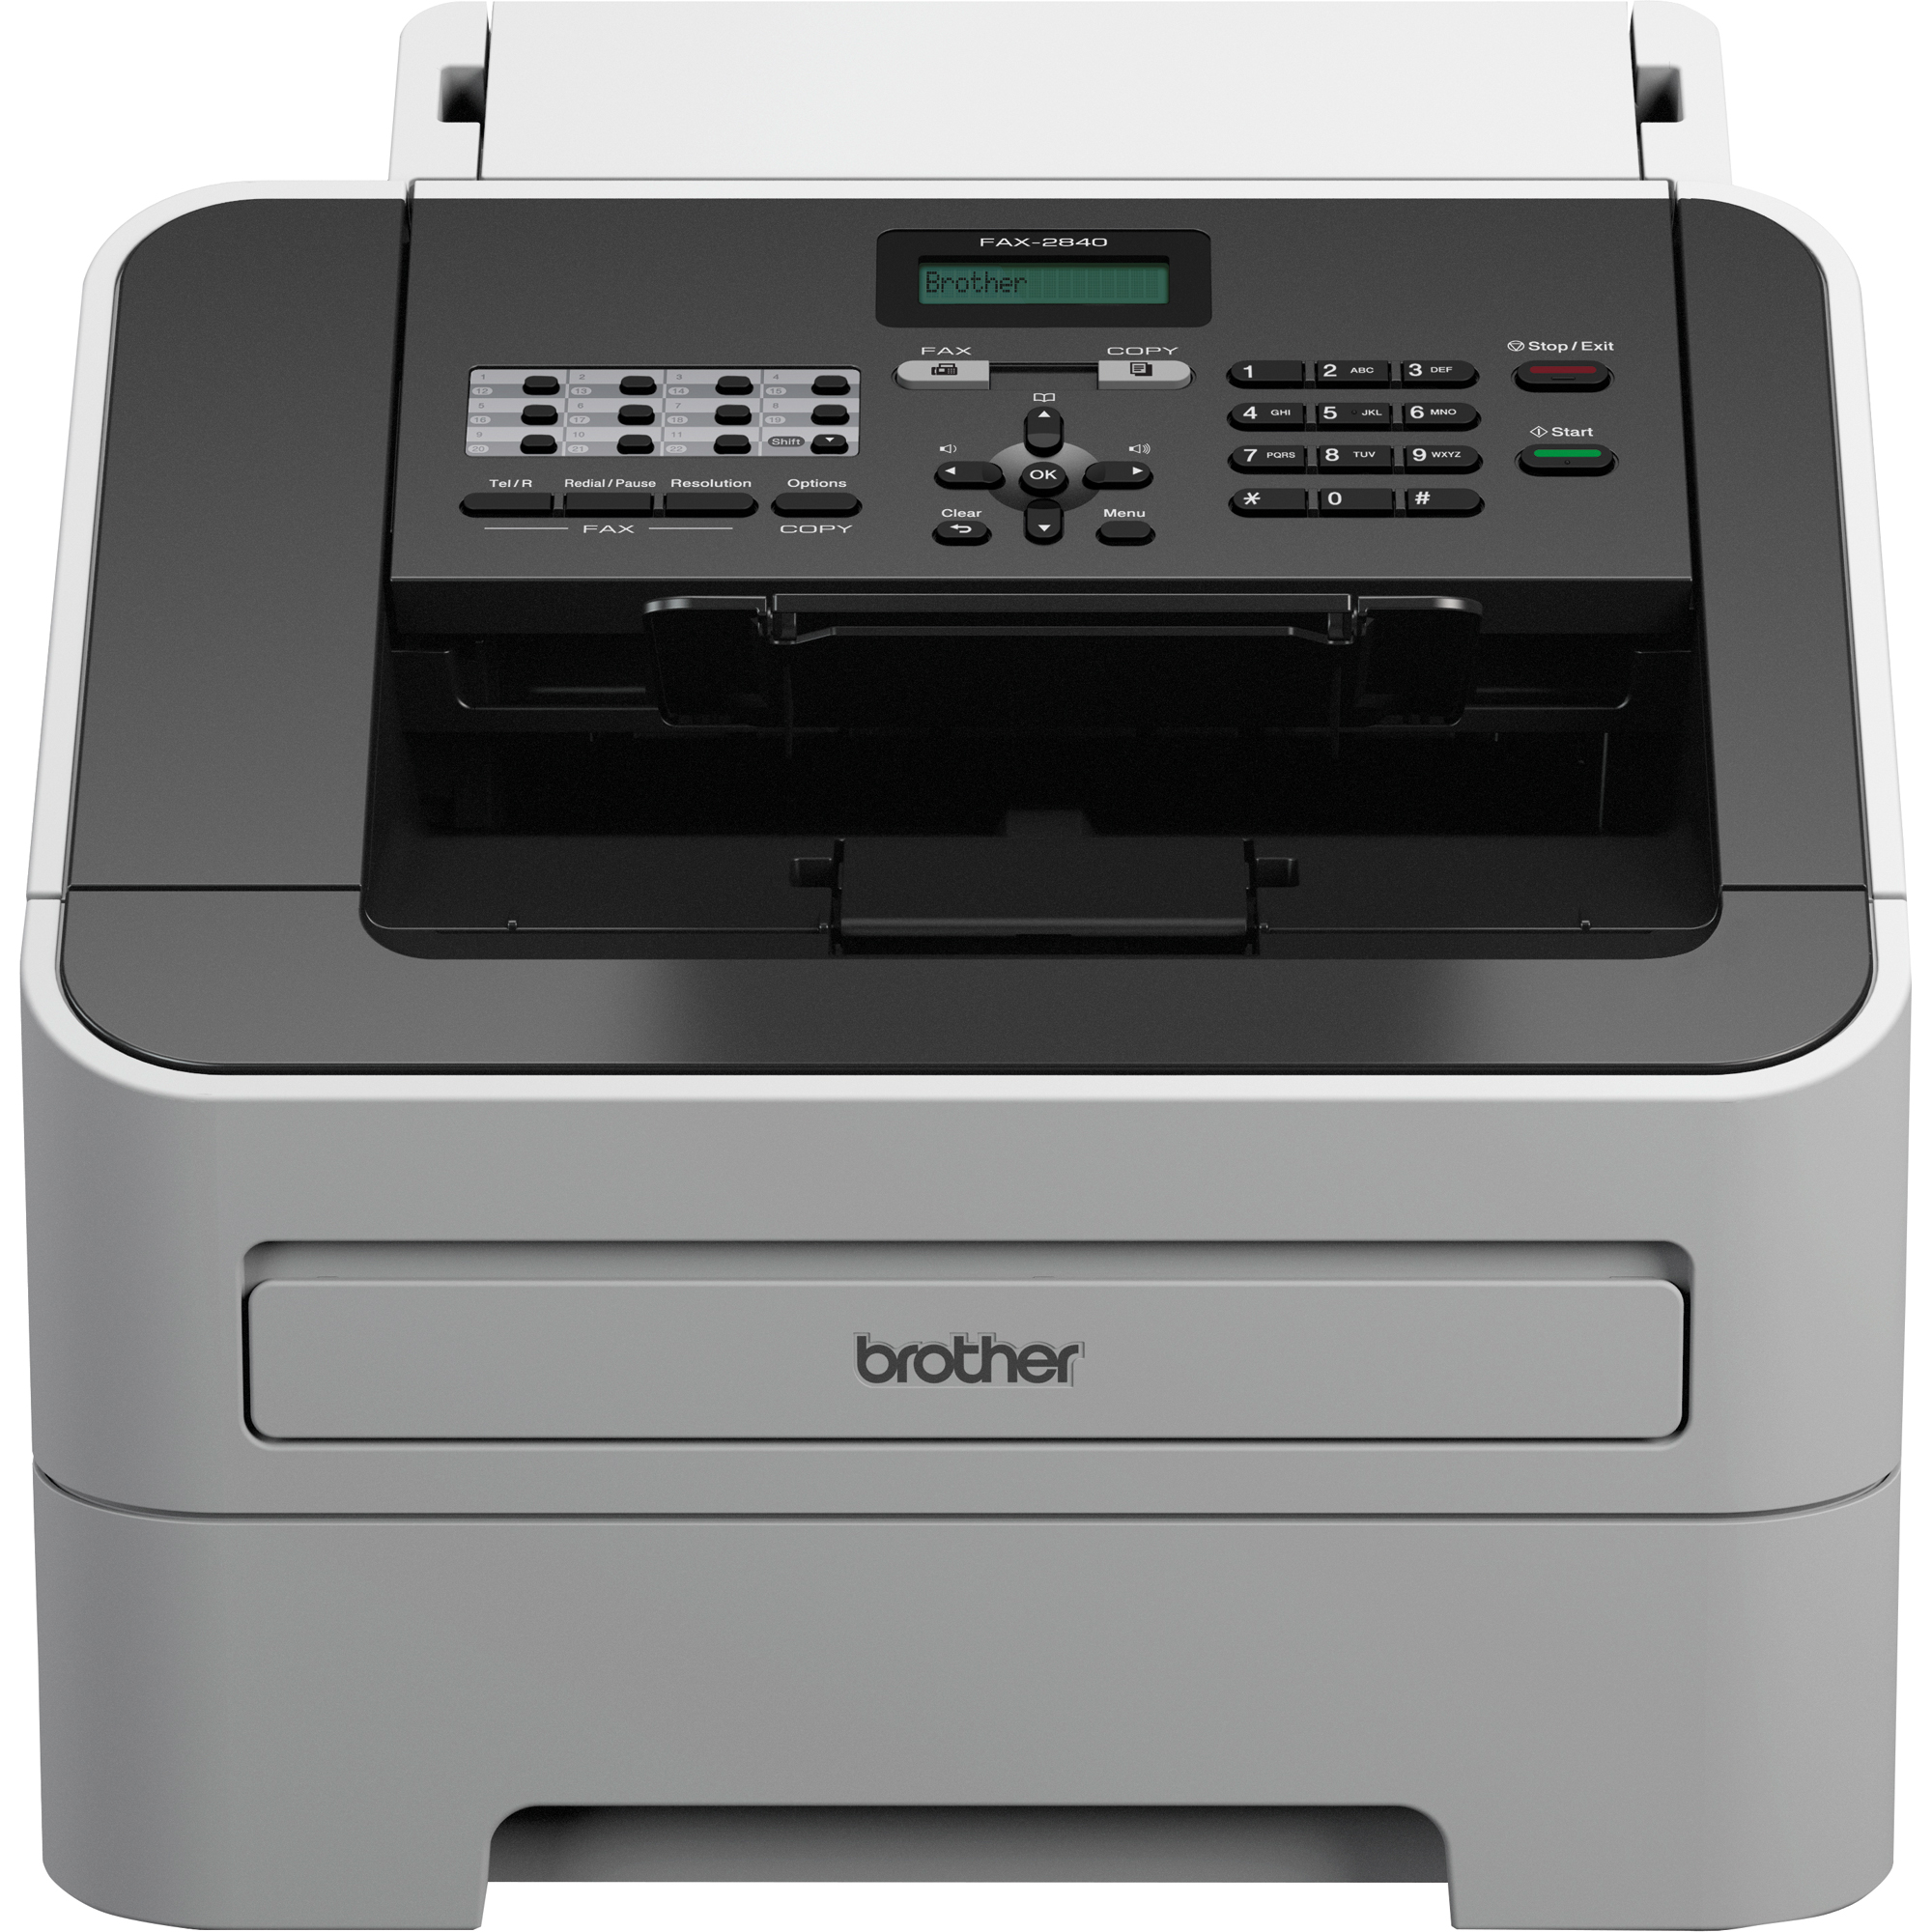 BROTHER Laserfax FAX-2840